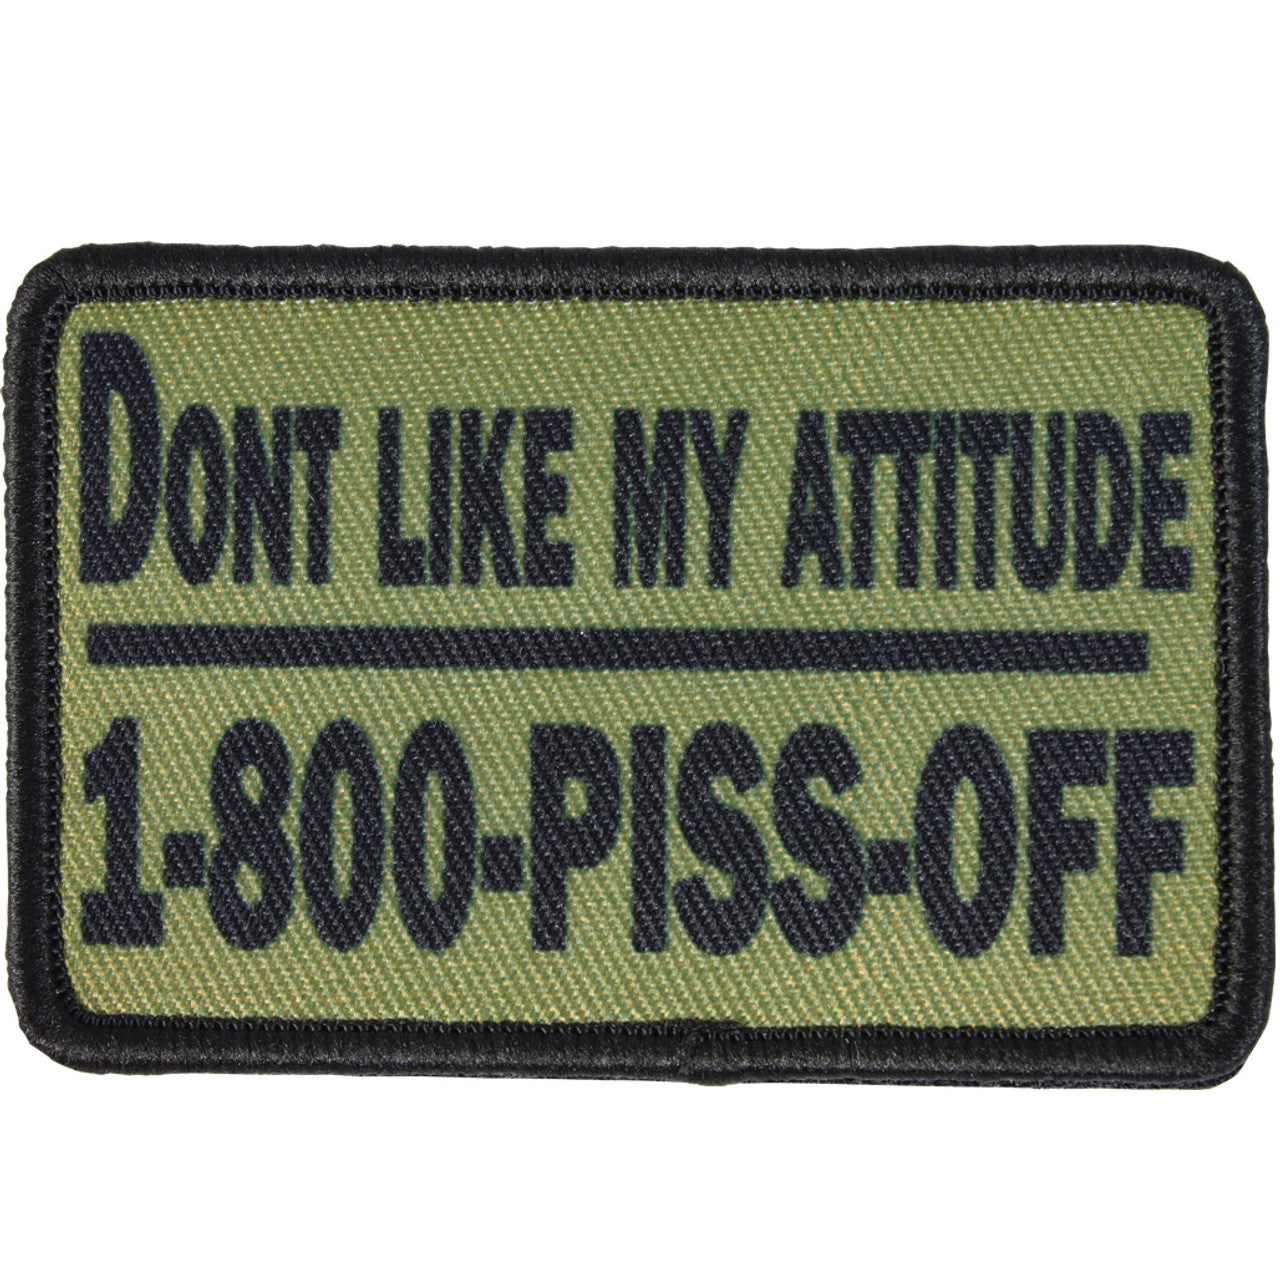 "1-800-PISS-OFF" MORALE PATCH